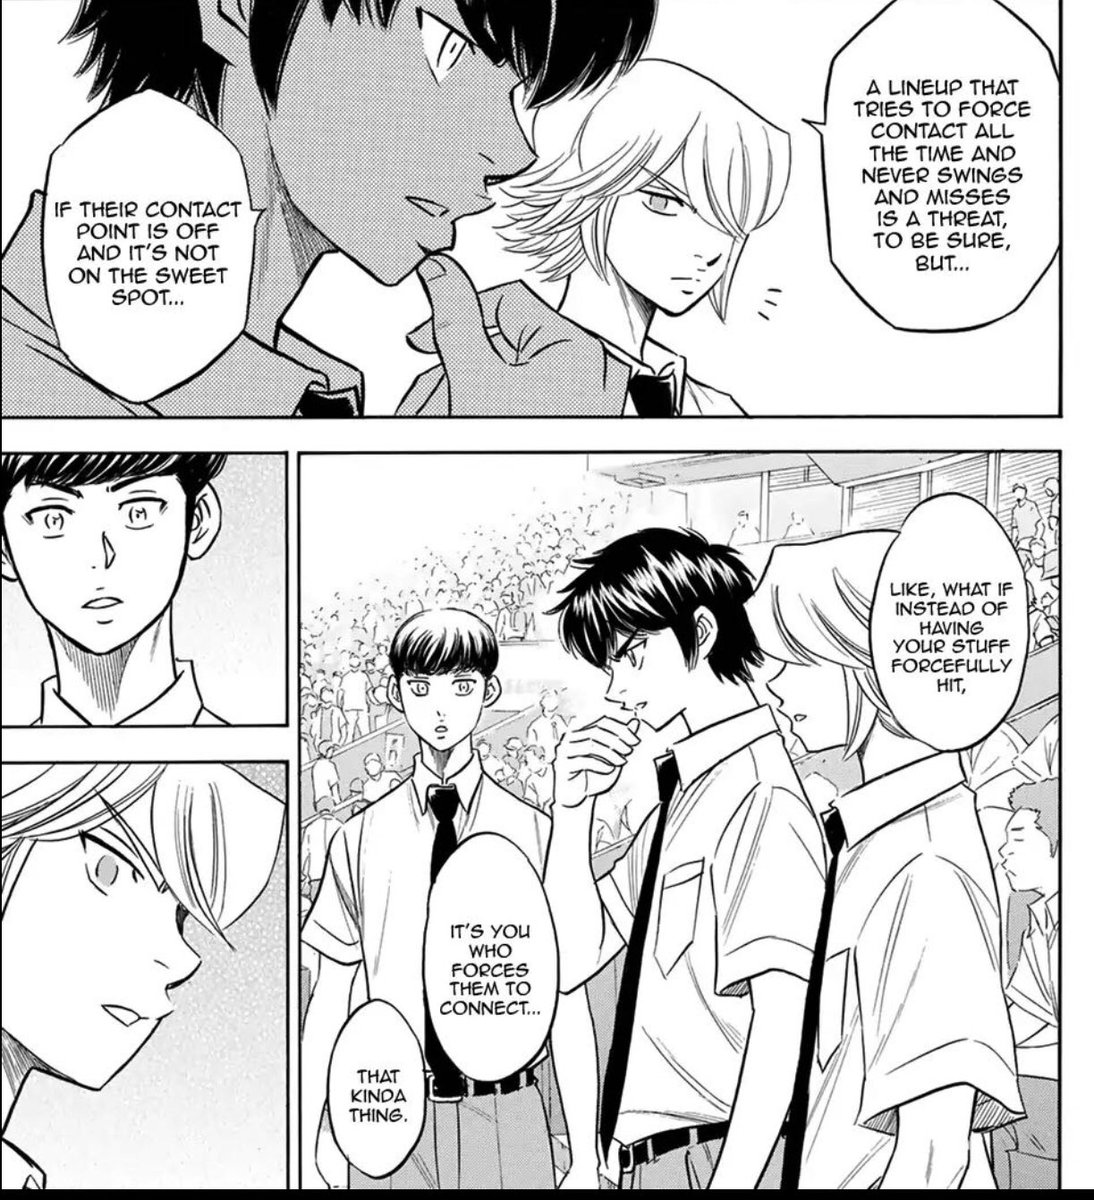 Yes friggin ace material eijun!Yes Terajima get us excited for the Ichidai vs seidou match!